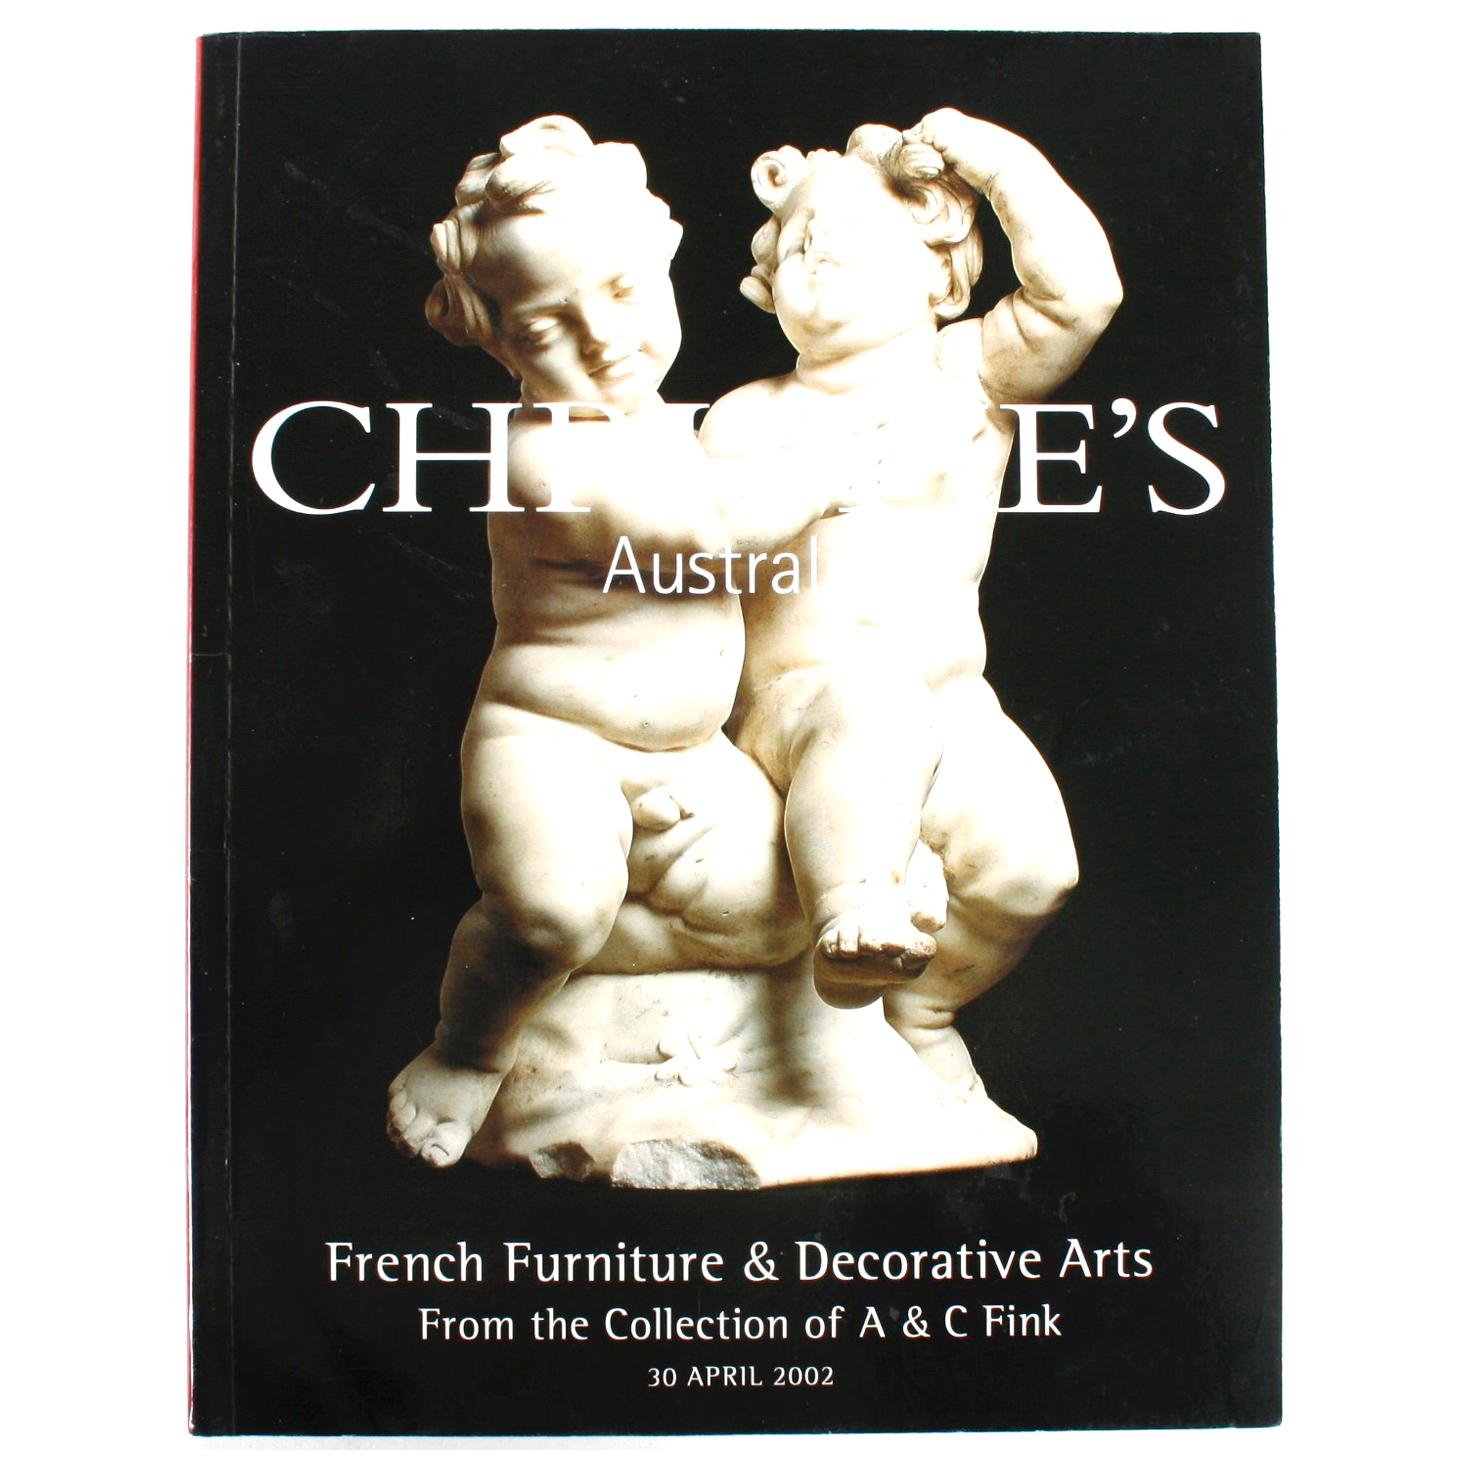 Christies avril 2002 French Furniture & Decorative Arts, a & C Fink Collections en vente